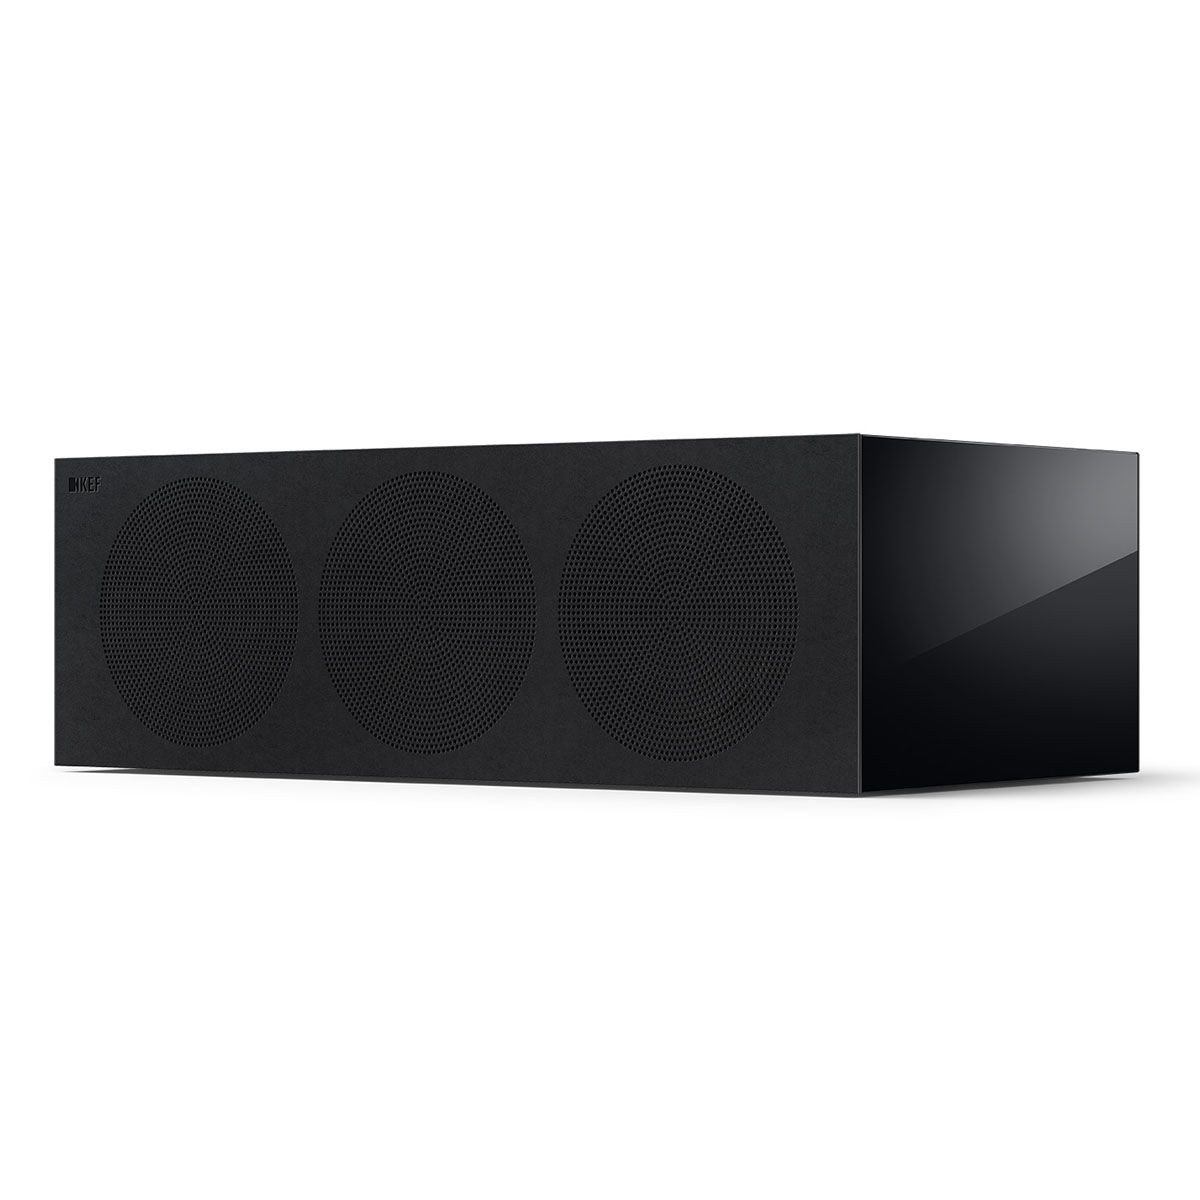 KEF R6 Meta LCR Speaker - Each black angled front view with grille